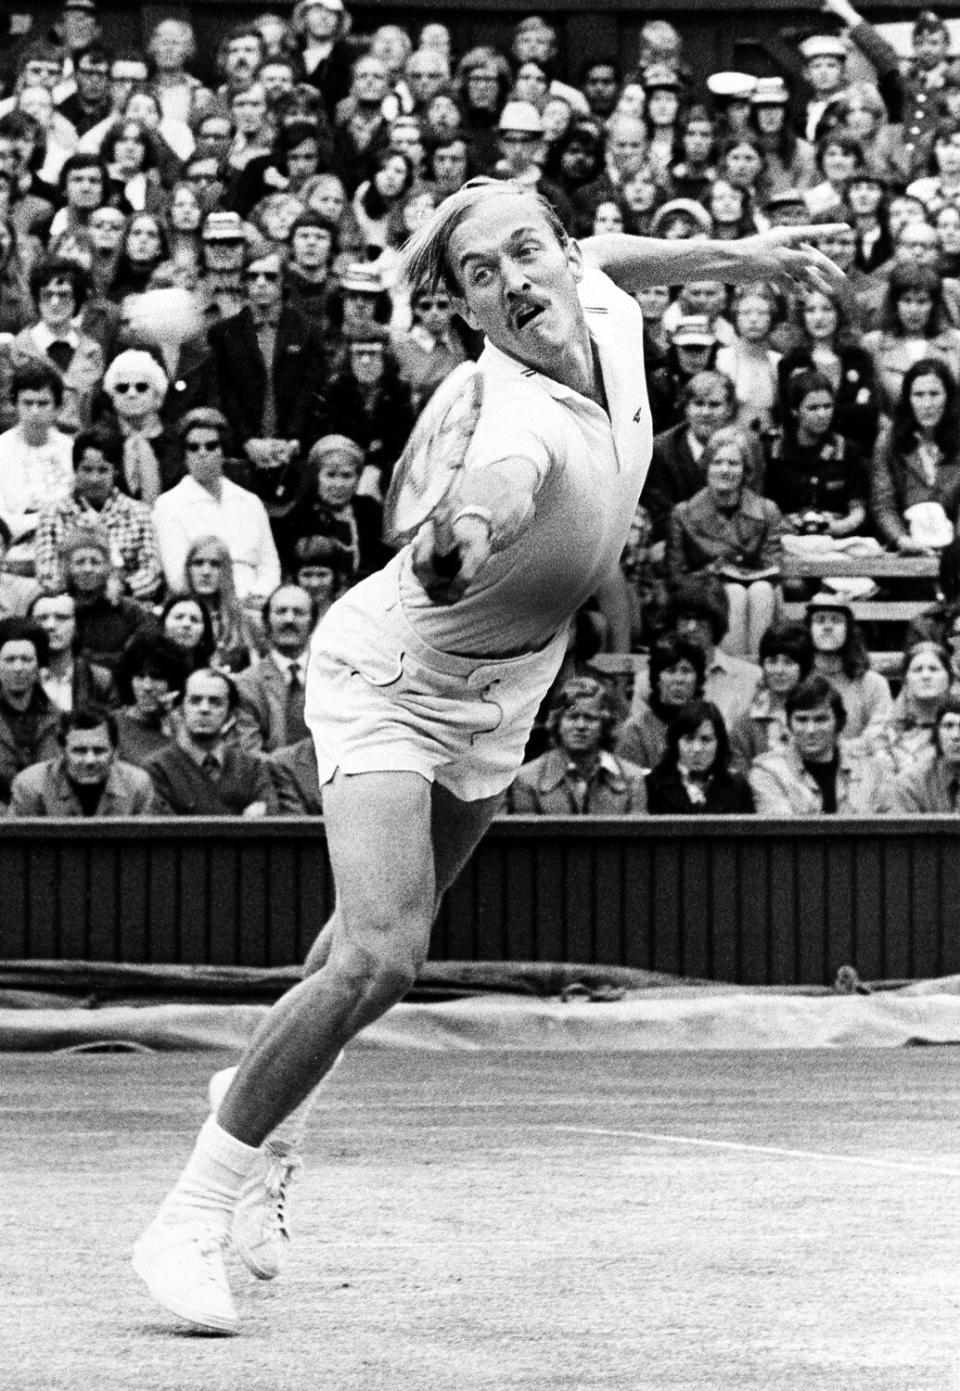 Stan Smith of the United States returns the ball to Ilie Nastase of Romania during a Wimbledon match in 1972.